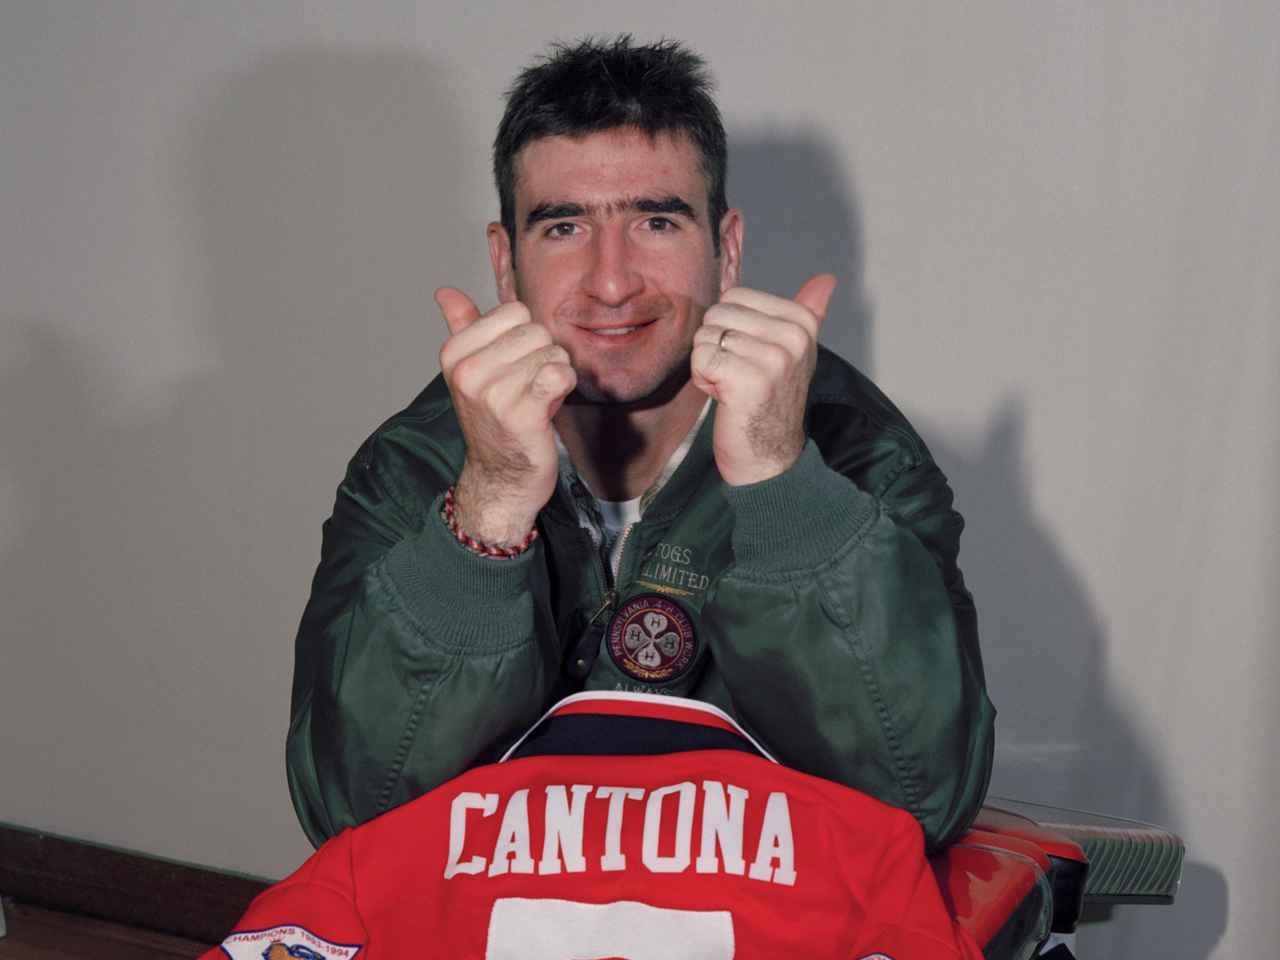 Manchester United - 👑 ➡️ 🔴 On this day in 1992, Eric Cantona